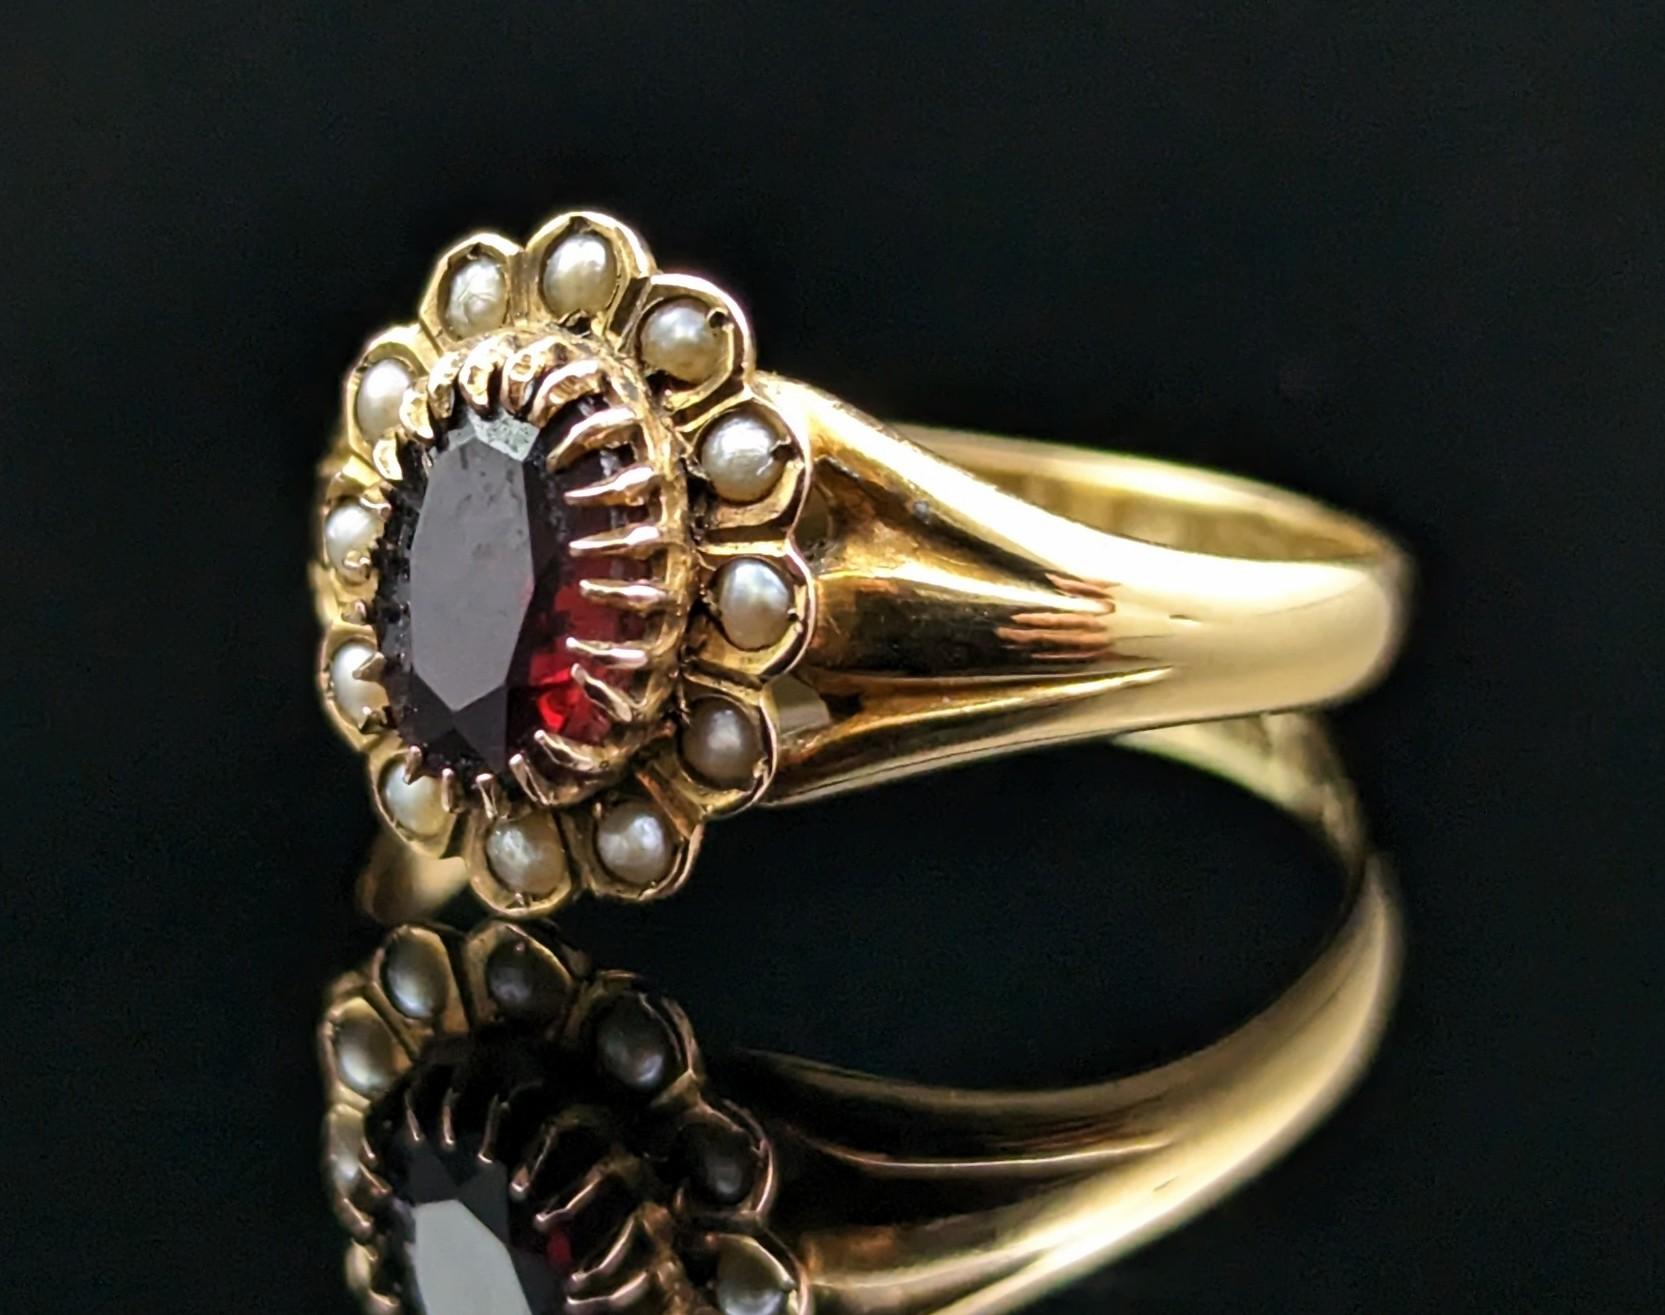 Antique Garnet and Pearl Cluster Ring, 18k Yellow Gold, Edwardian 1